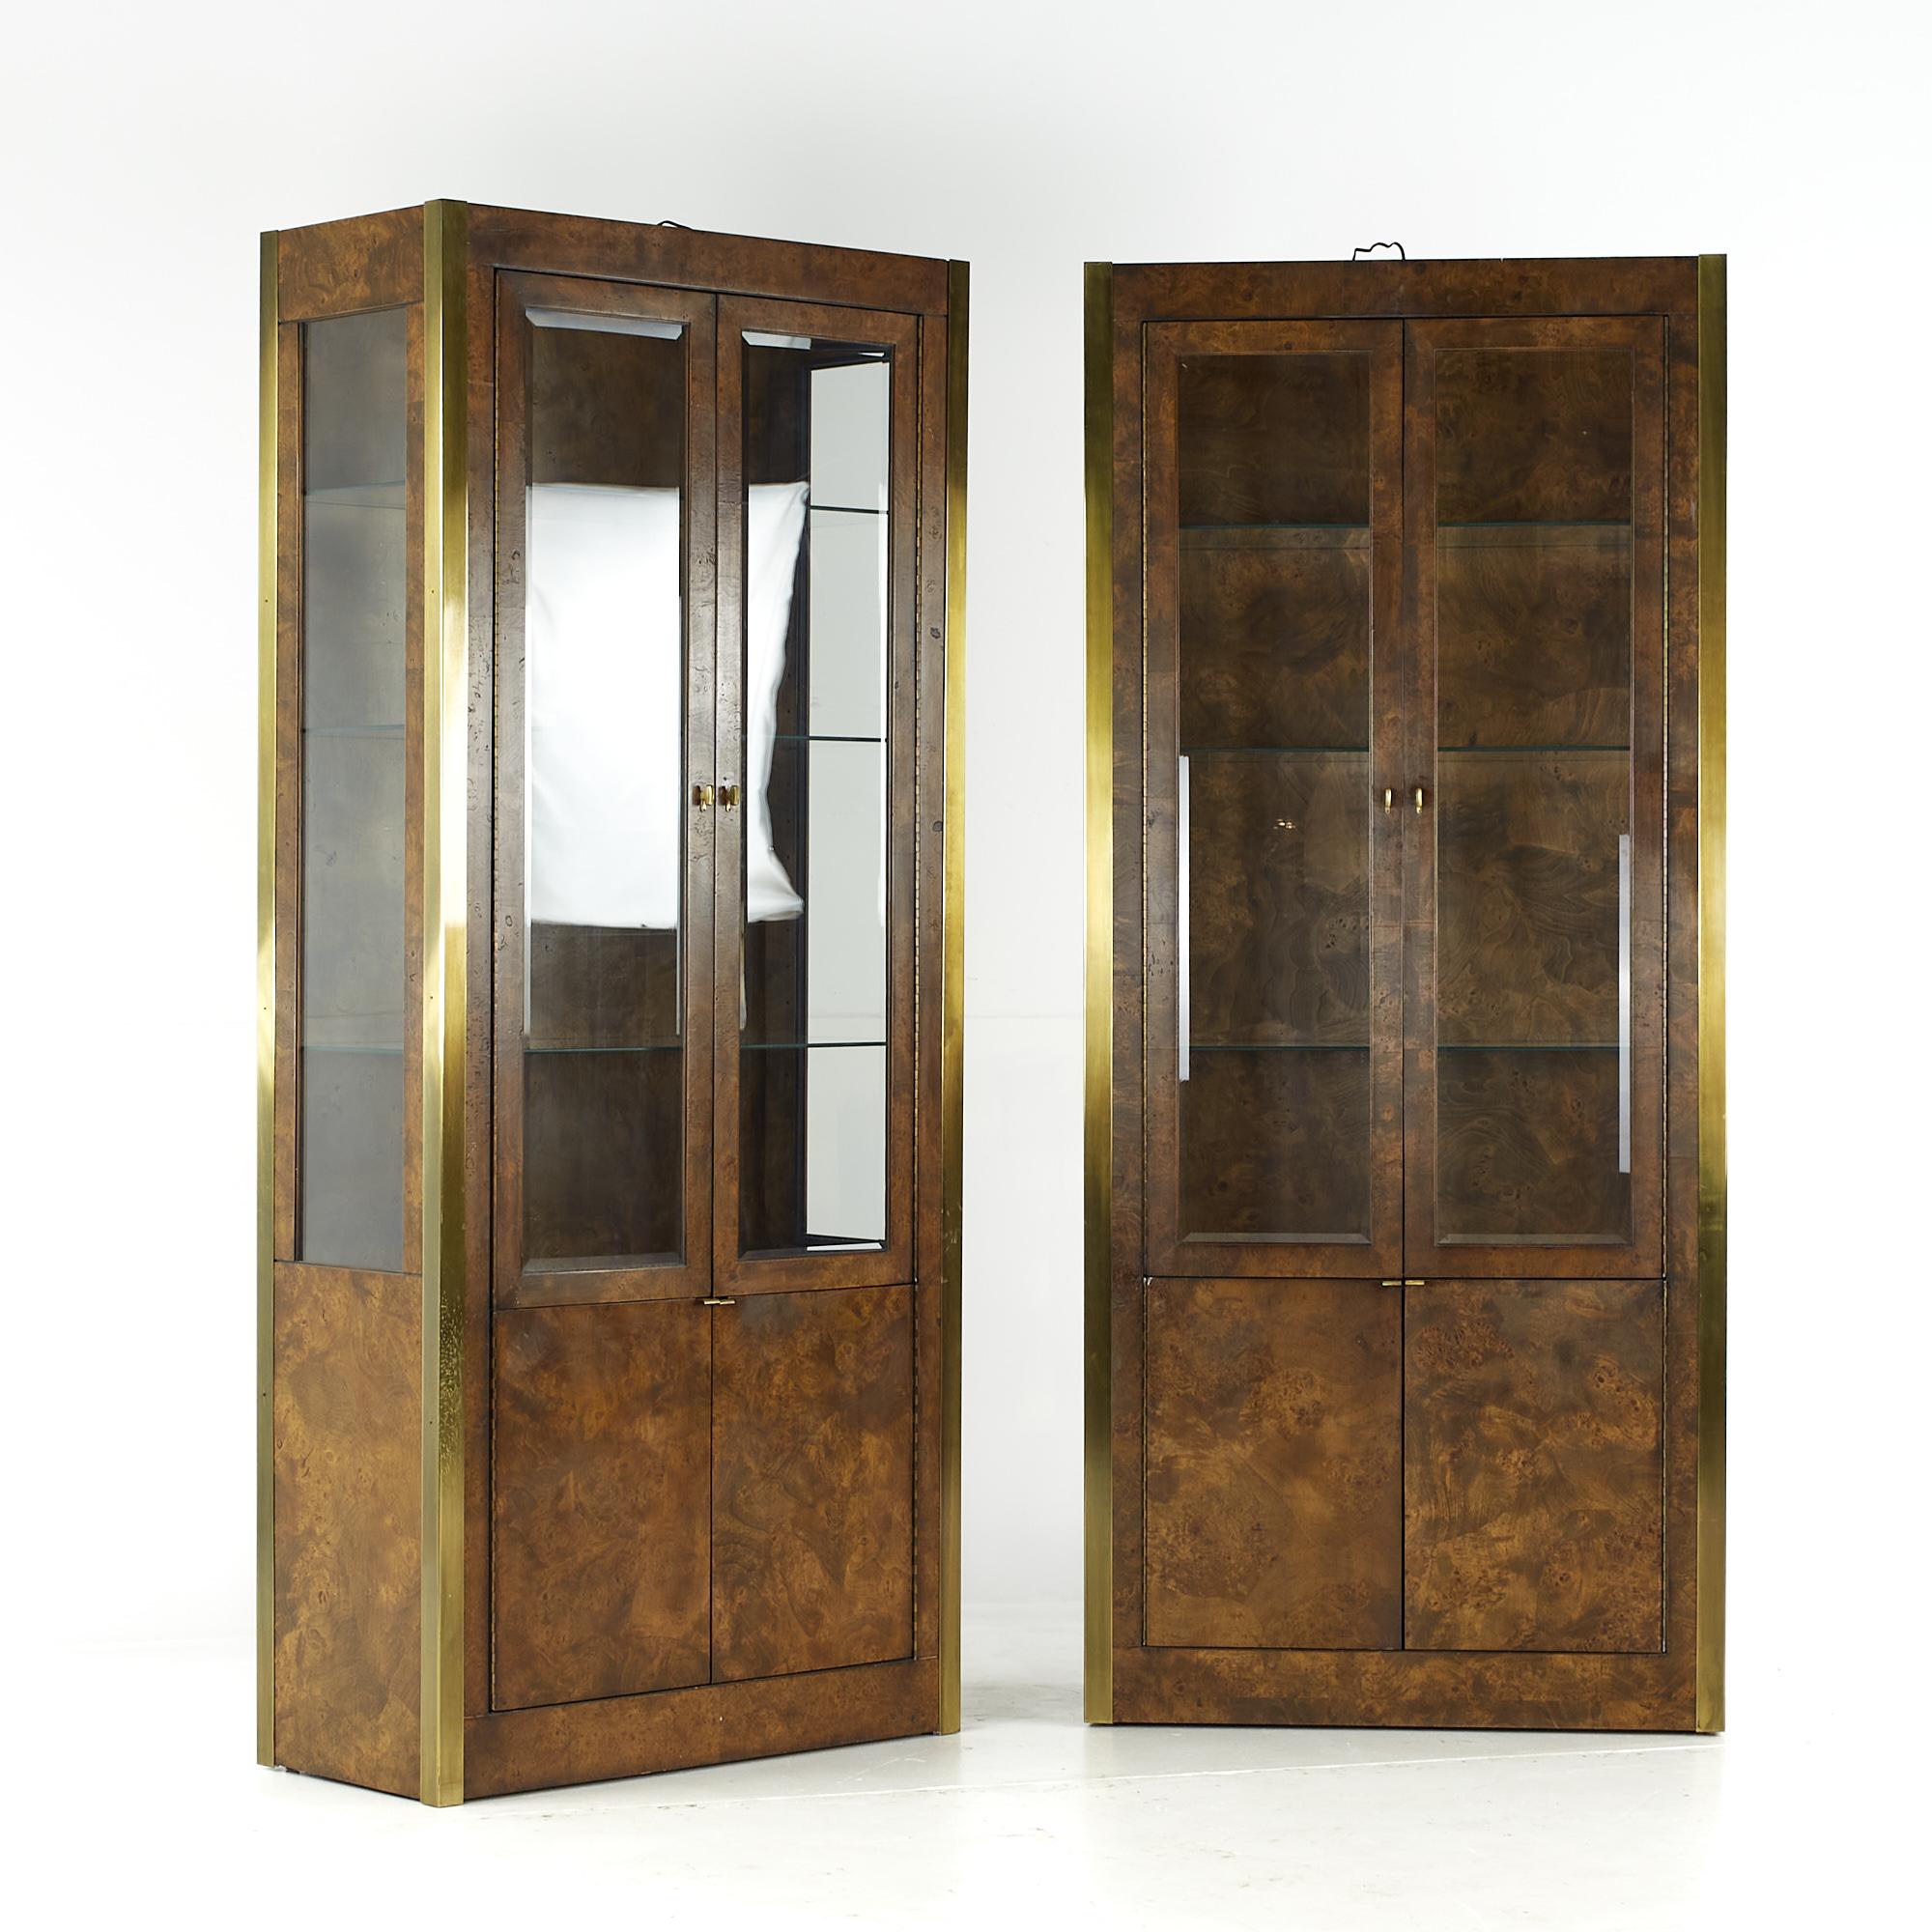 Tomlinson mid century Display cabinet - pair

Each cabinet measures: 34 wide x 16 deep x 78 inches high

All pieces of furniture can be had in what we call restored vintage condition. That means the piece is restored upon purchase so it’s free